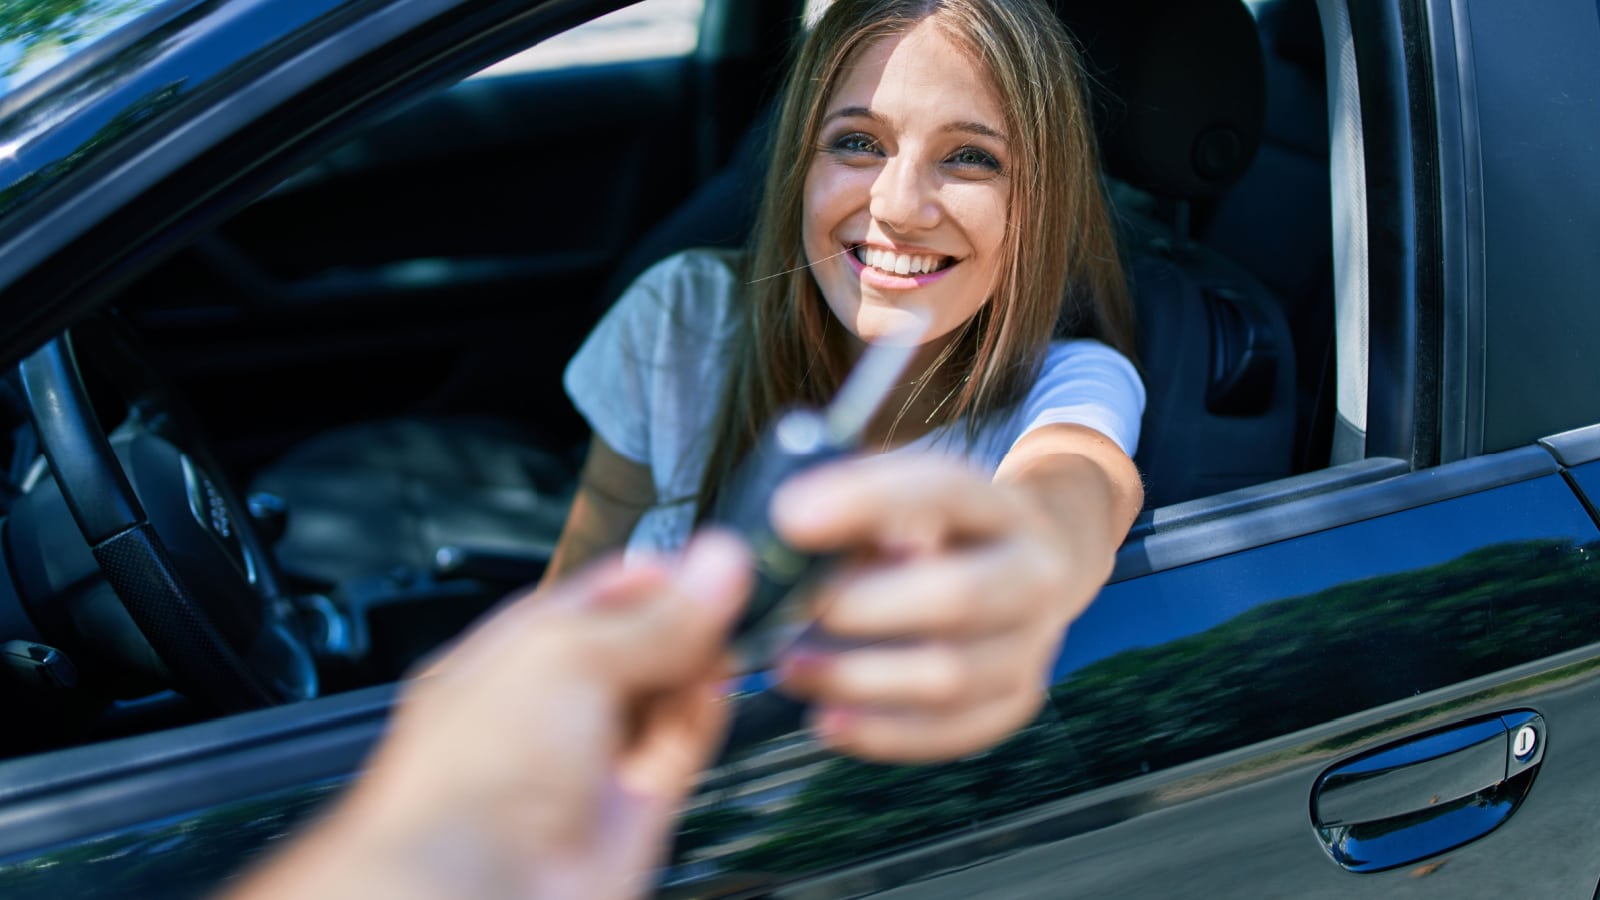 Young beautiful blonde woman smiling happy holding key of a new car.